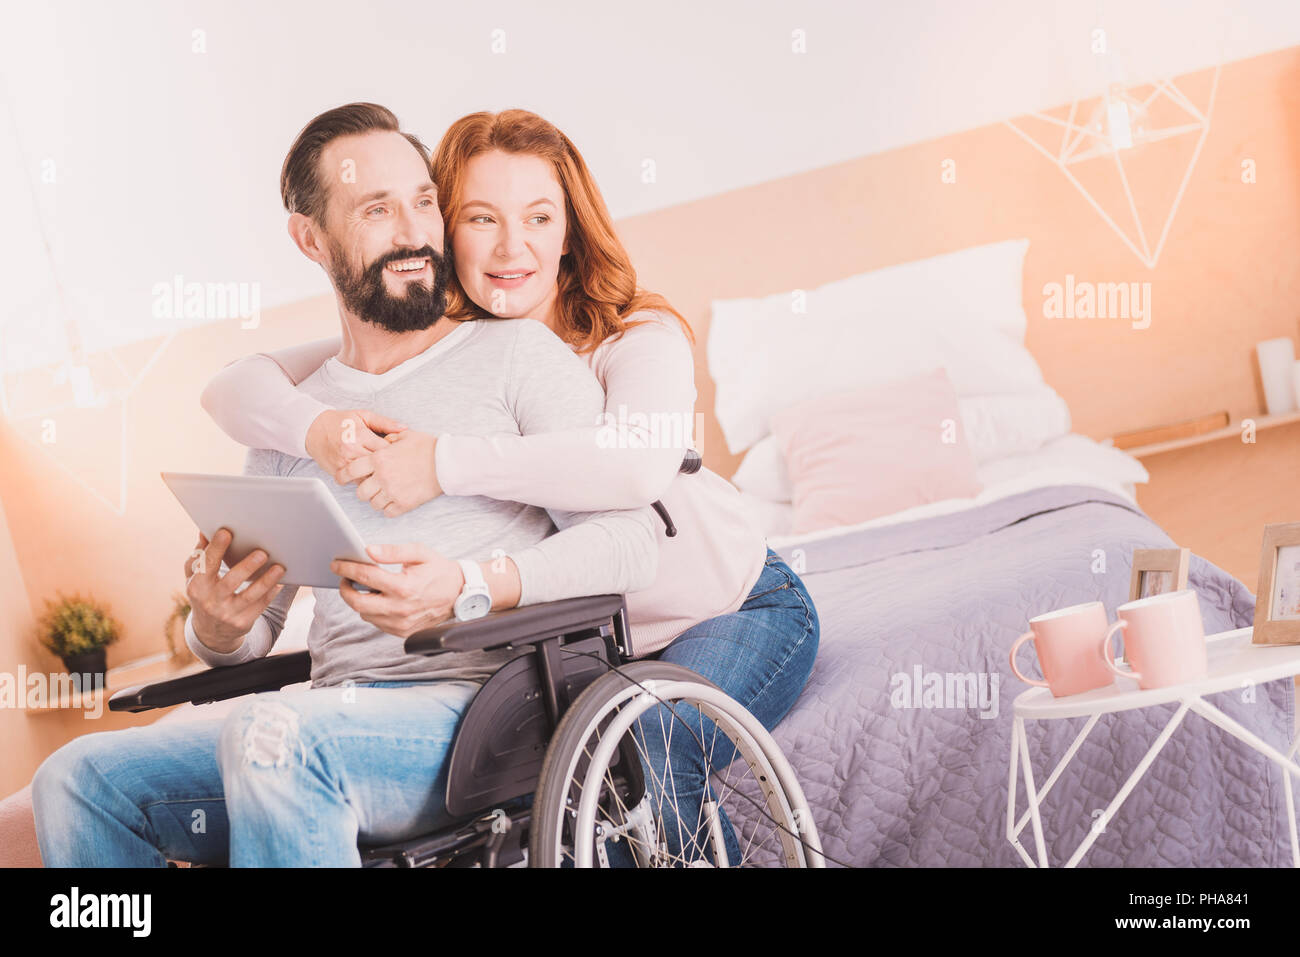 Cheerful wheelchaired man using a tablet with his wife Stock Photo